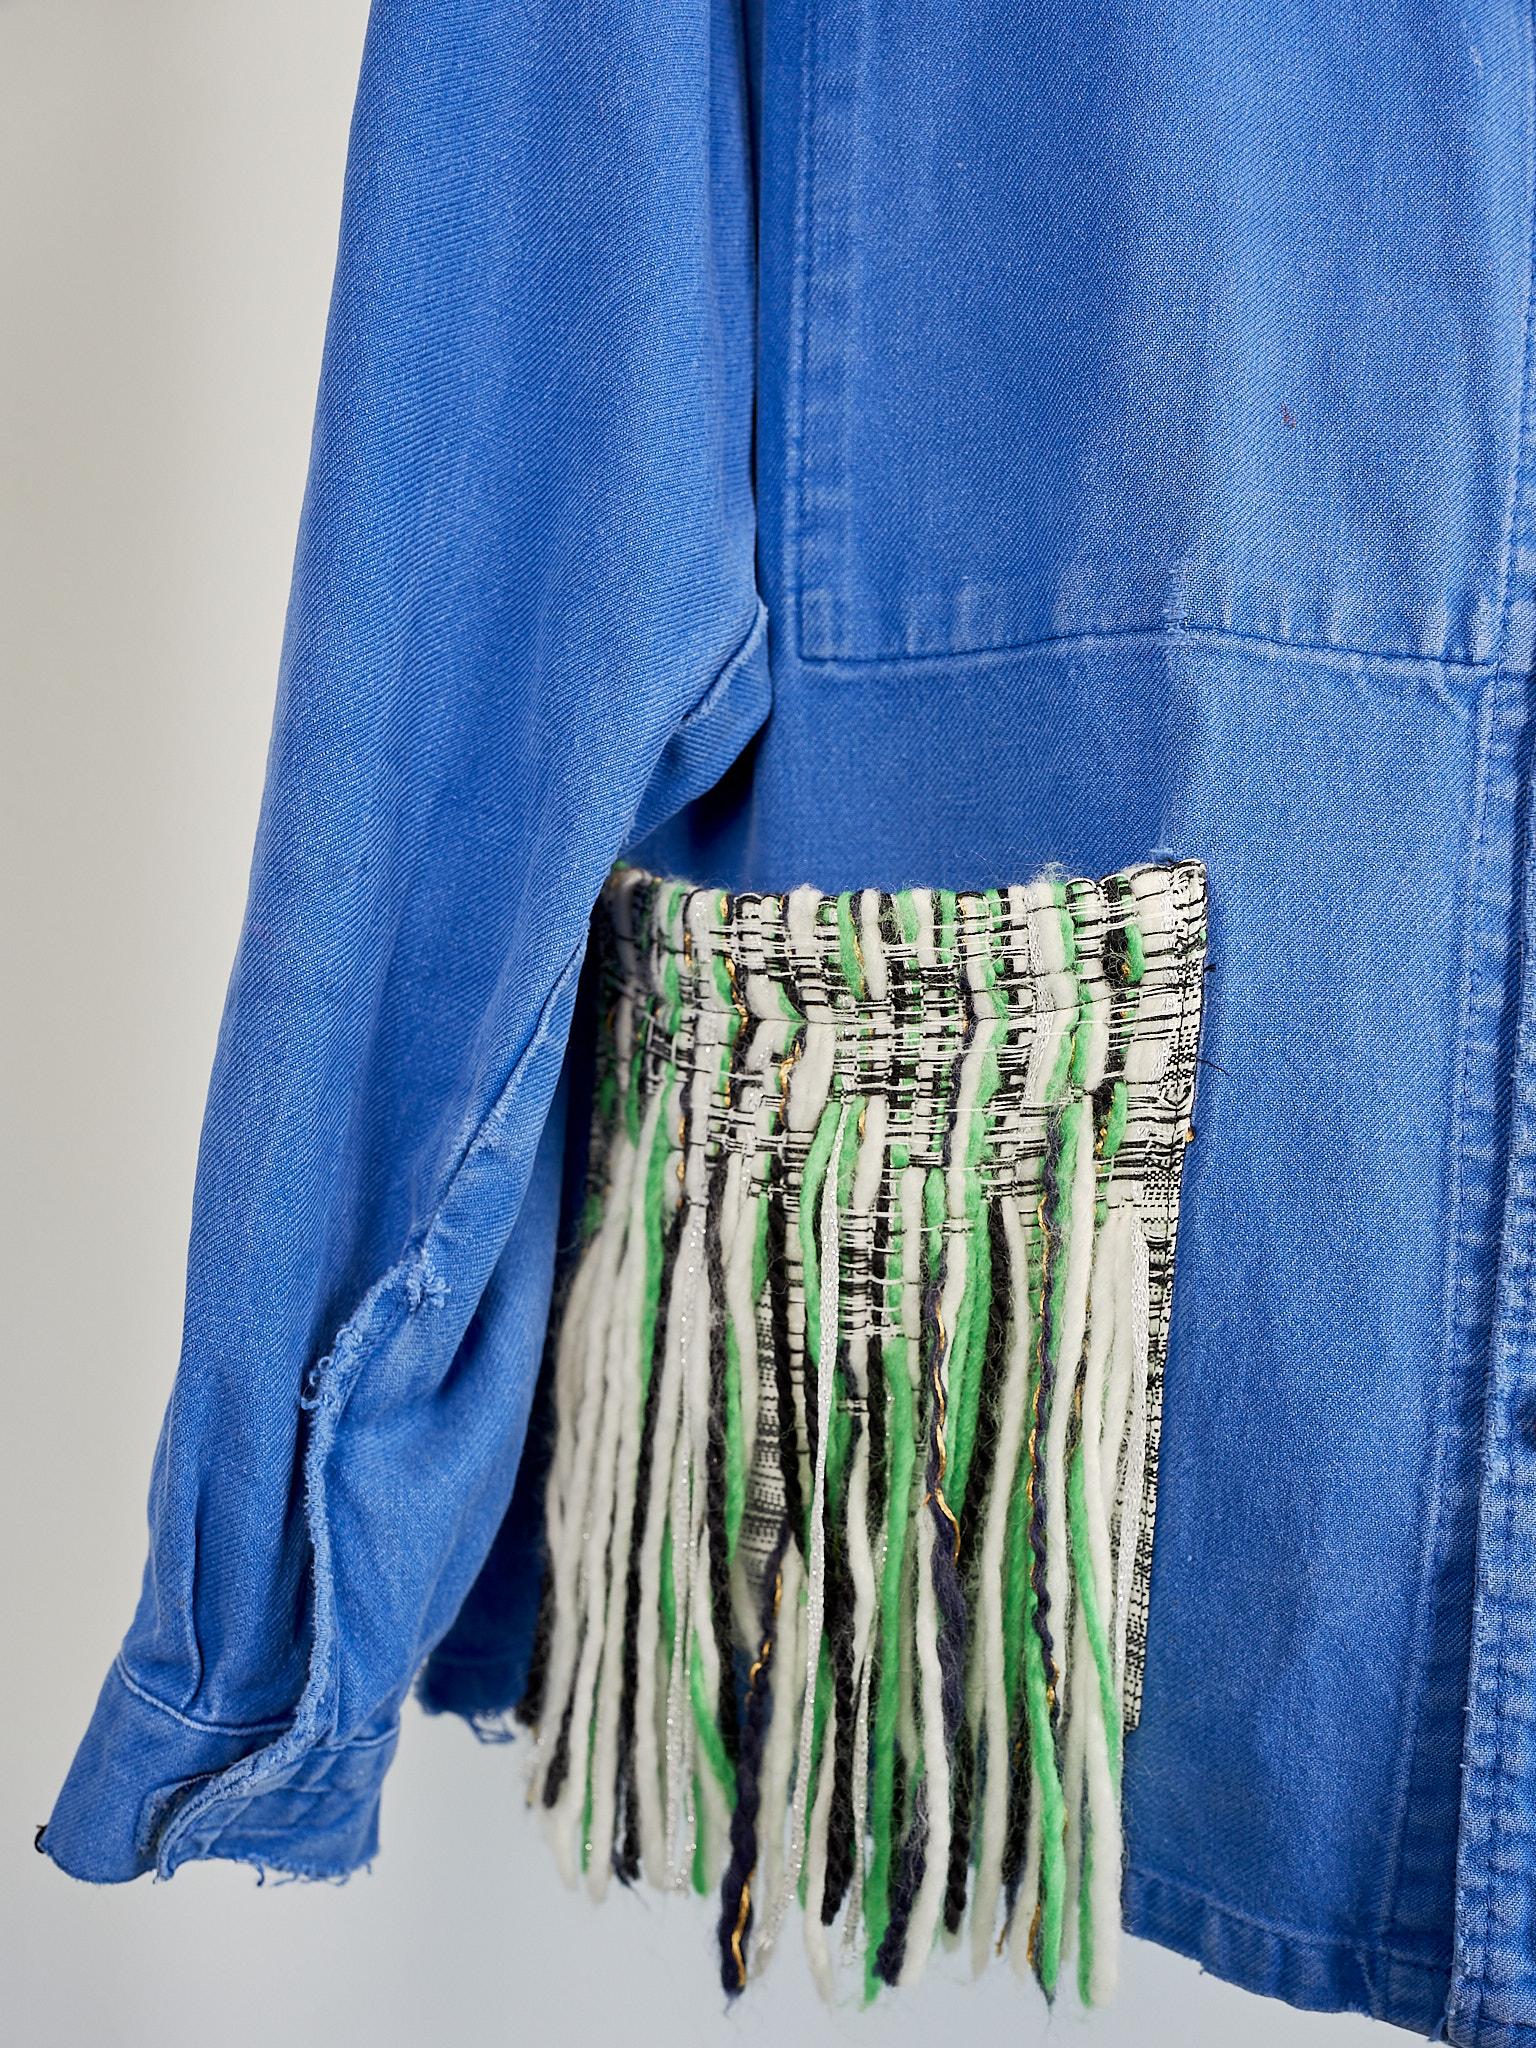  Wool Fringes Embellished Pockets Blue Cobalt Cotton French Work Wear J Dauphin In New Condition In Los Angeles, CA